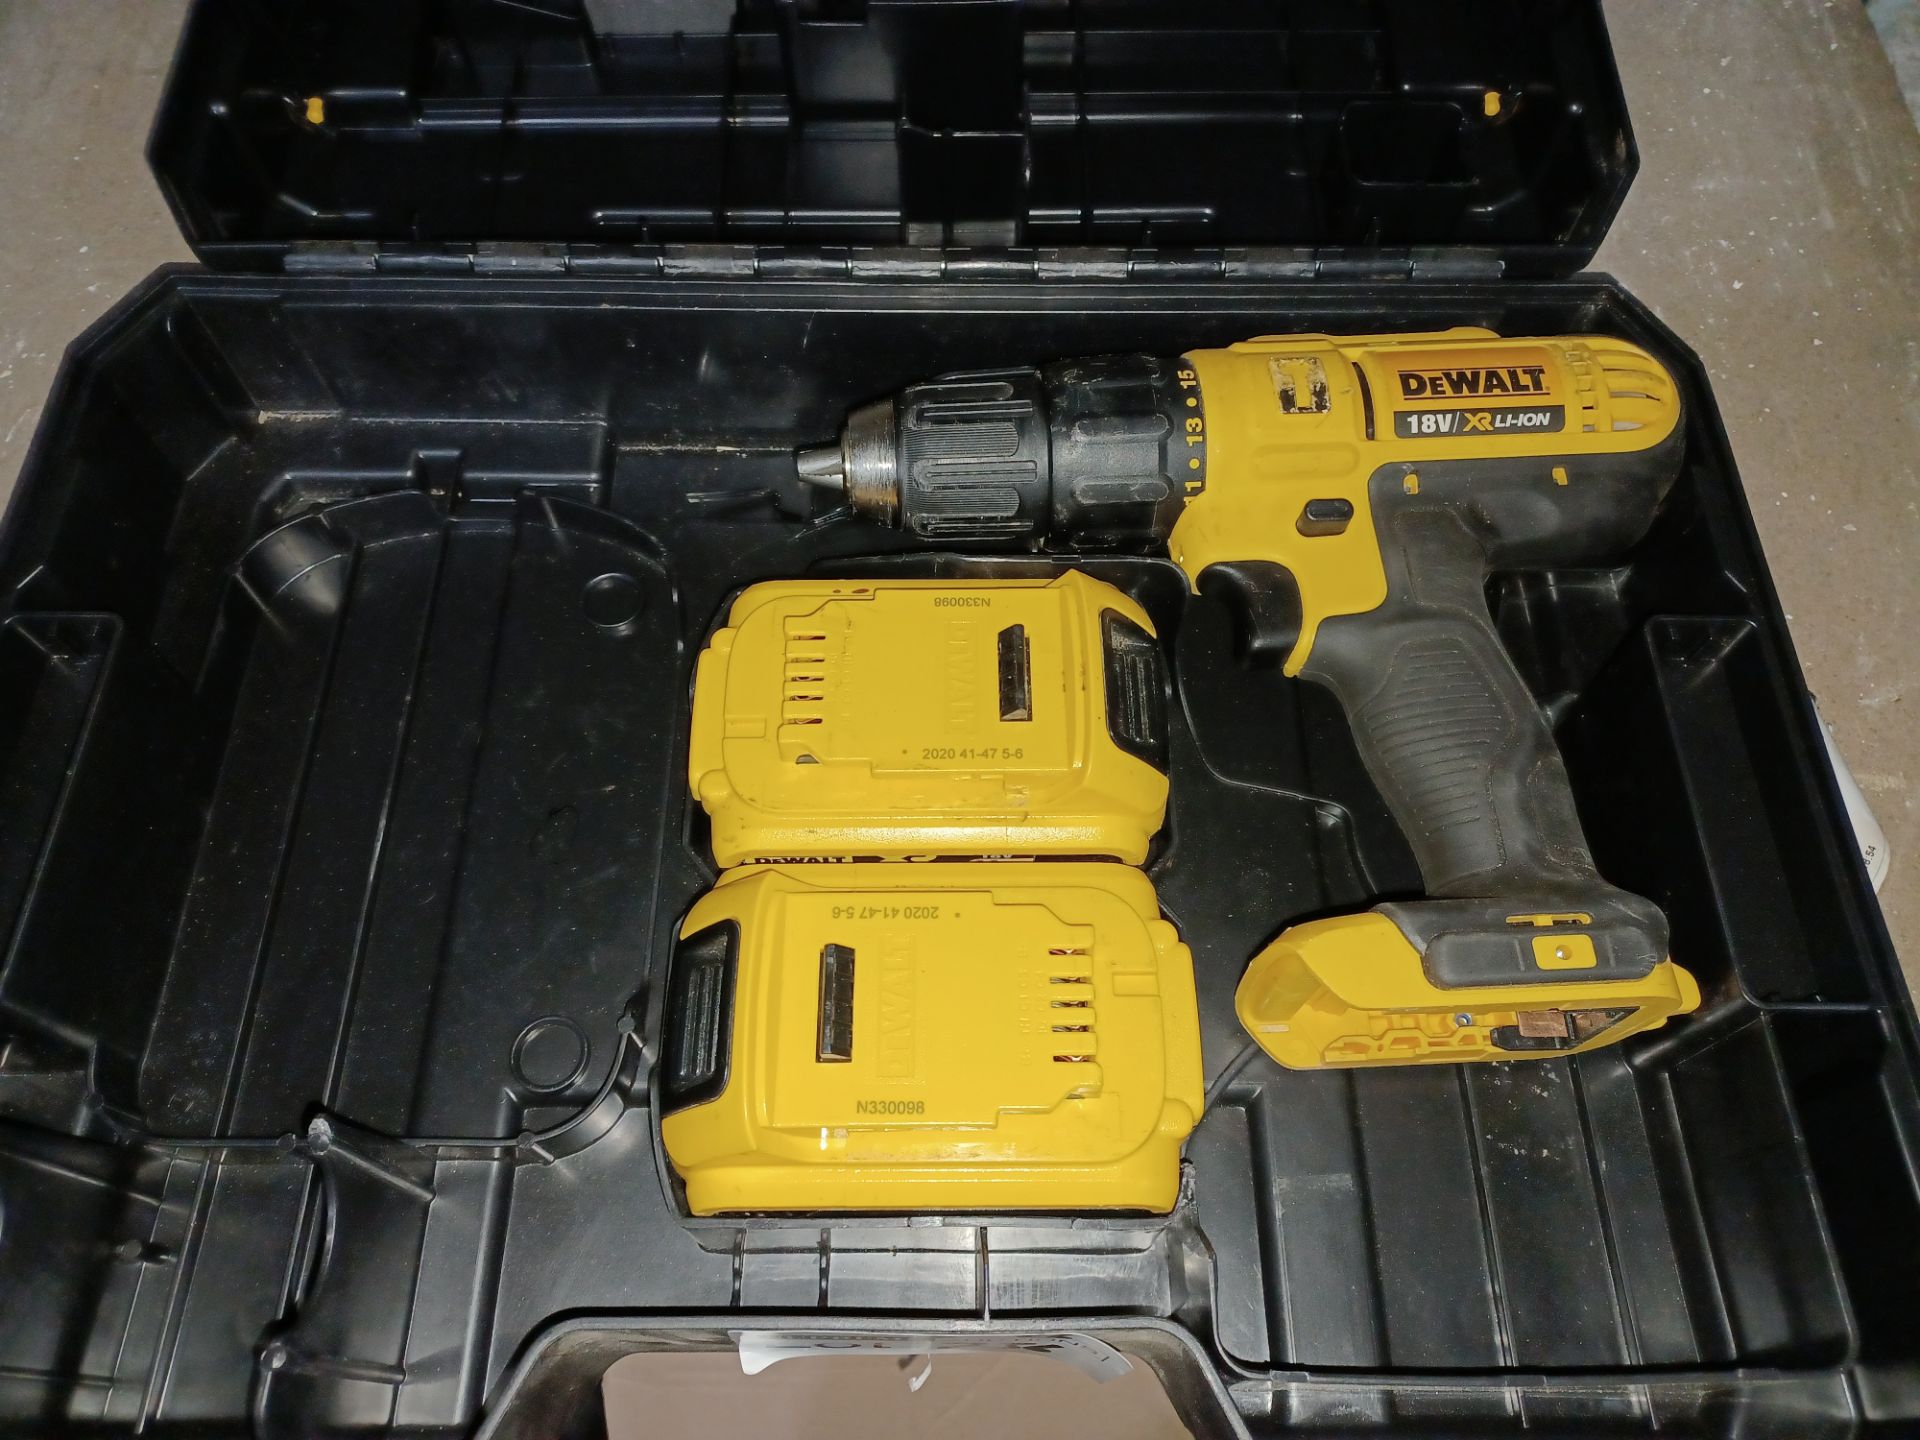 DEWALT DCD776D2T- GB 18V 2.0AH LI-ION XR CORDLESS COMBI DRILL COMES WITH 2 BATTERIES AND CARRY